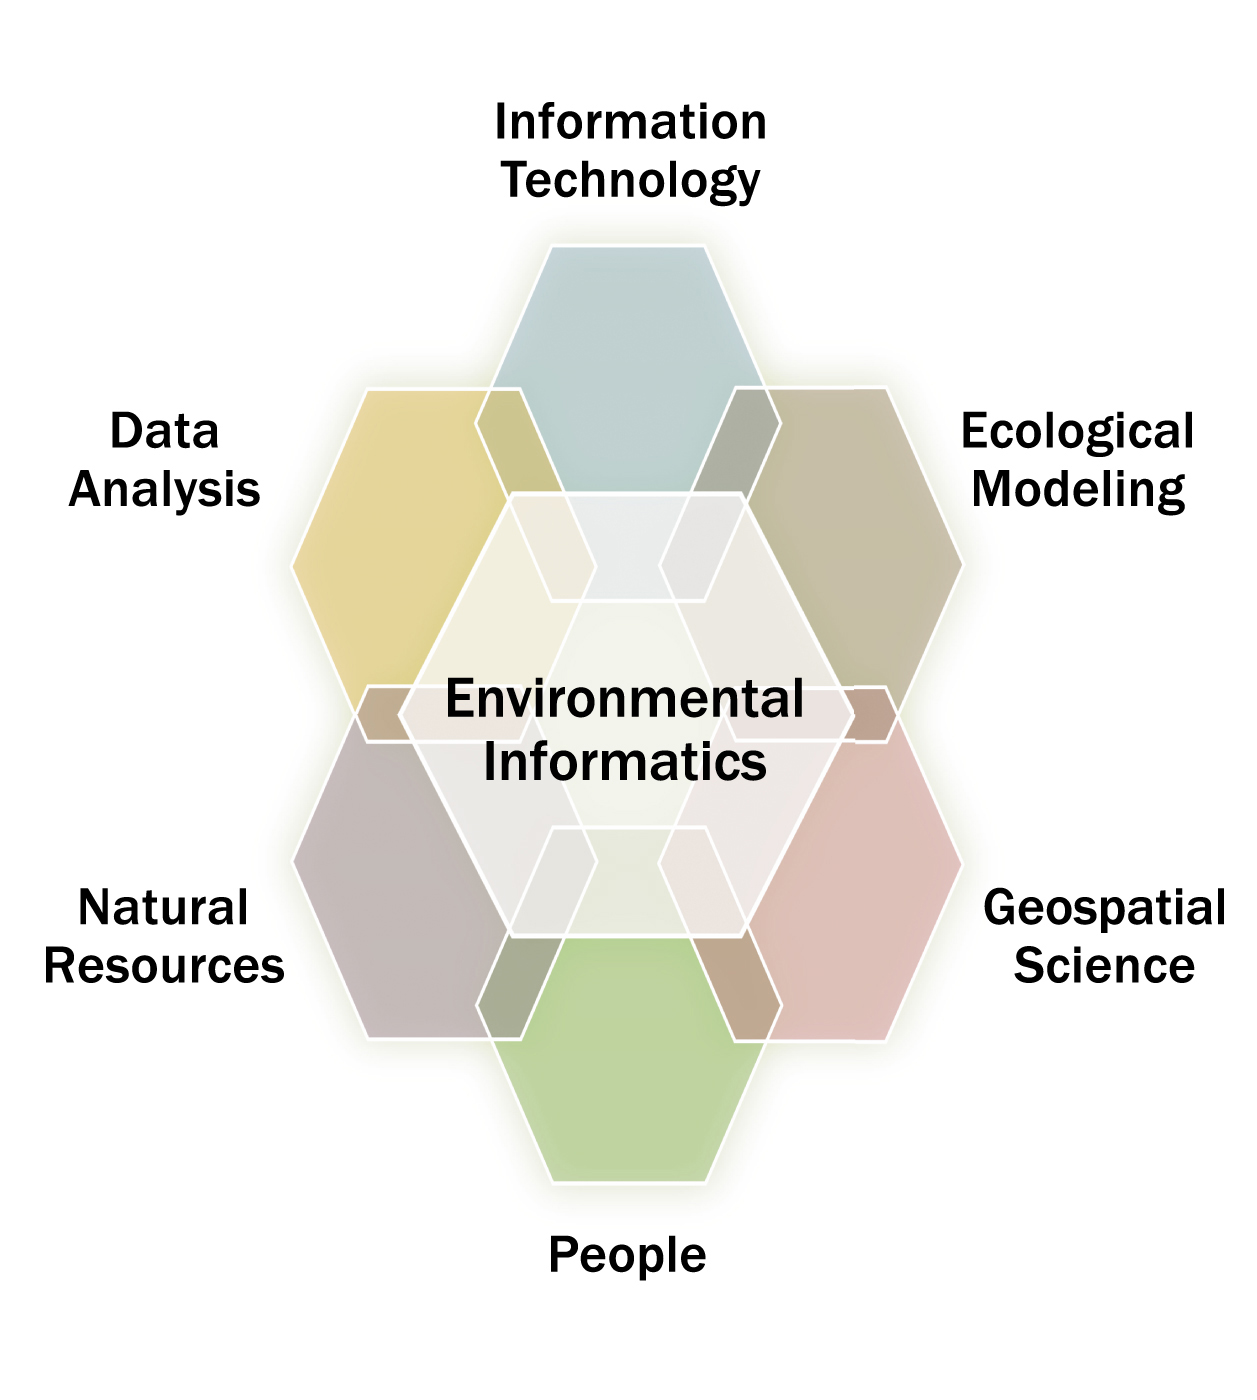 A graphic with environmental informatics at the center, surrounded by information technology, ecological modeling, geospatial science, people, natural resources, and data analysis.